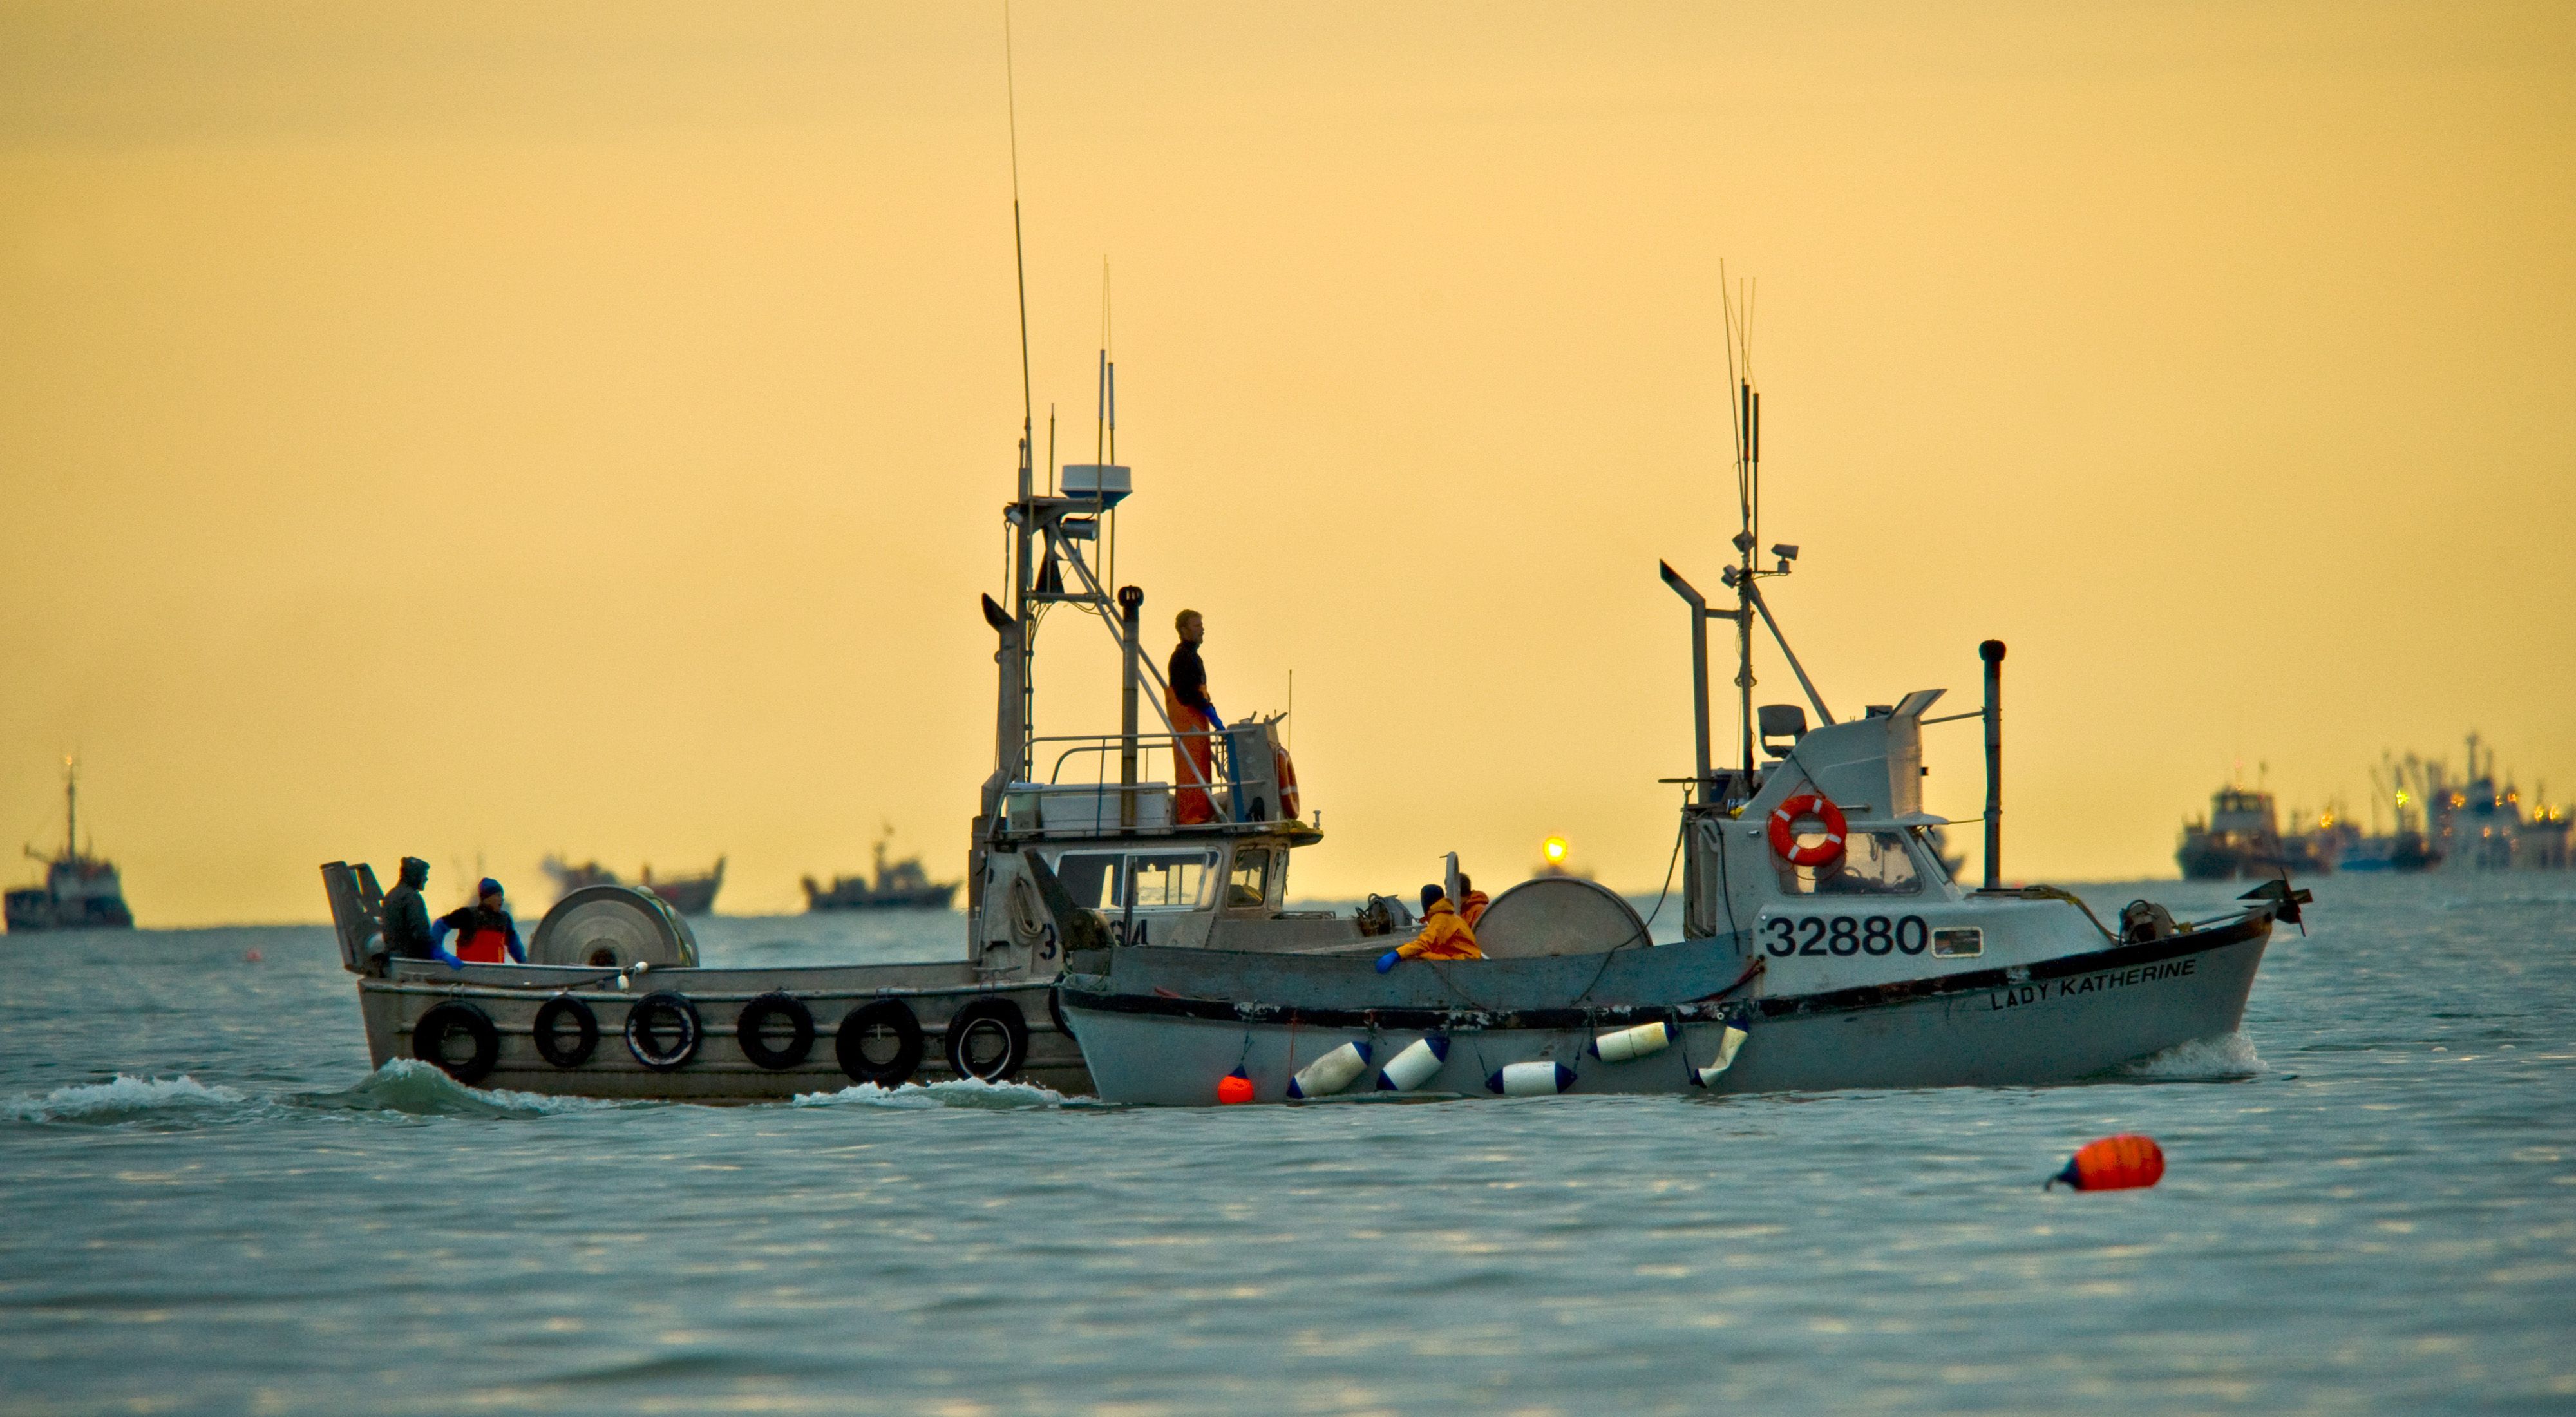 Commercial fishing boats at sea during sunset